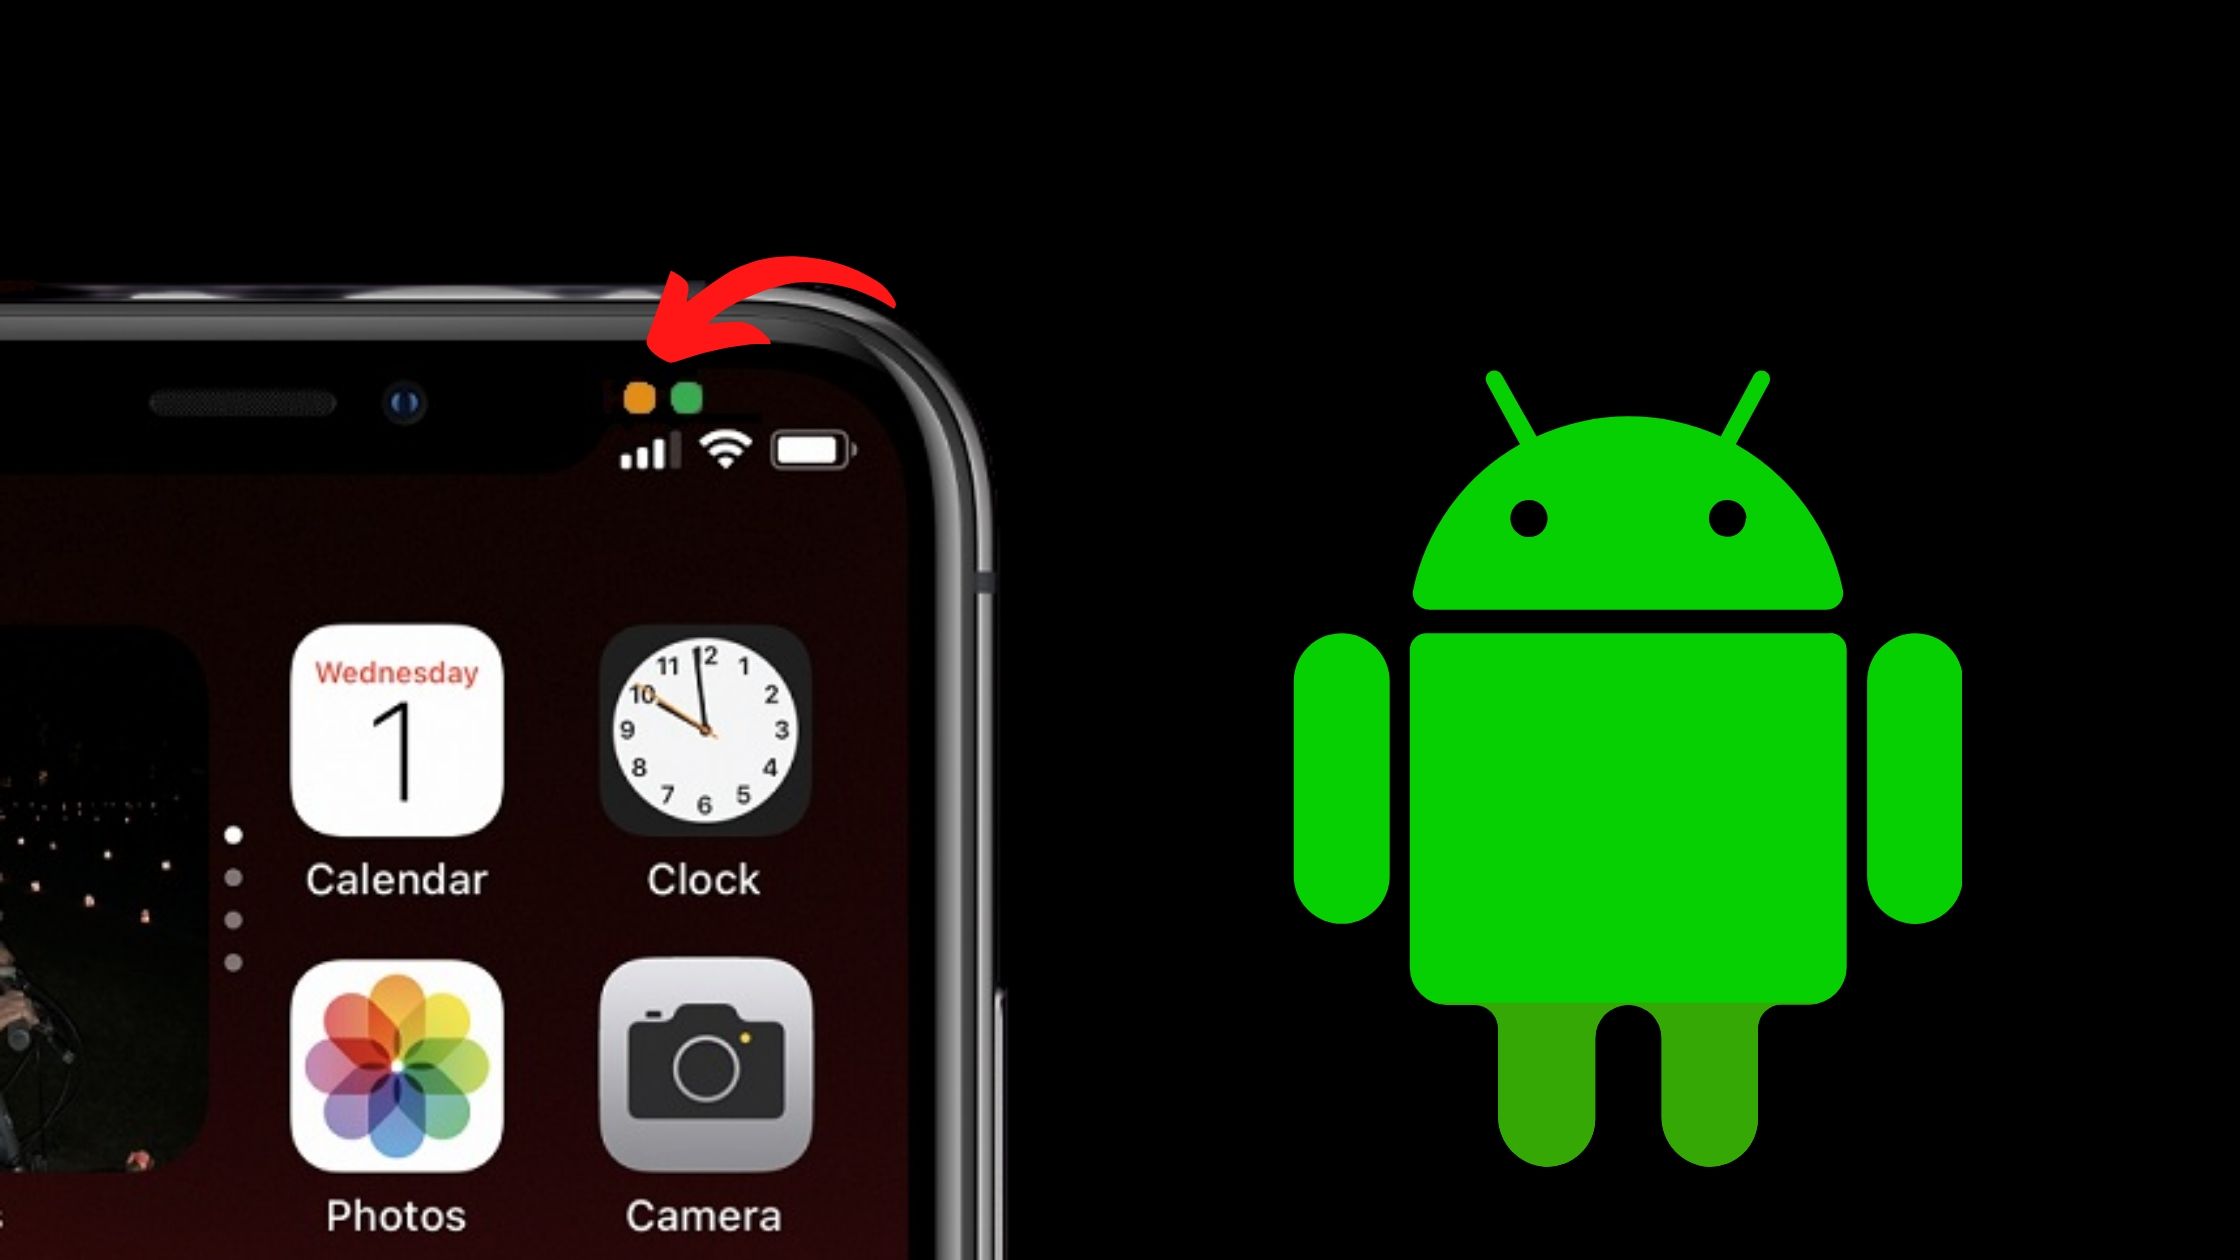 How to get iOS 14 access indicators in Android?